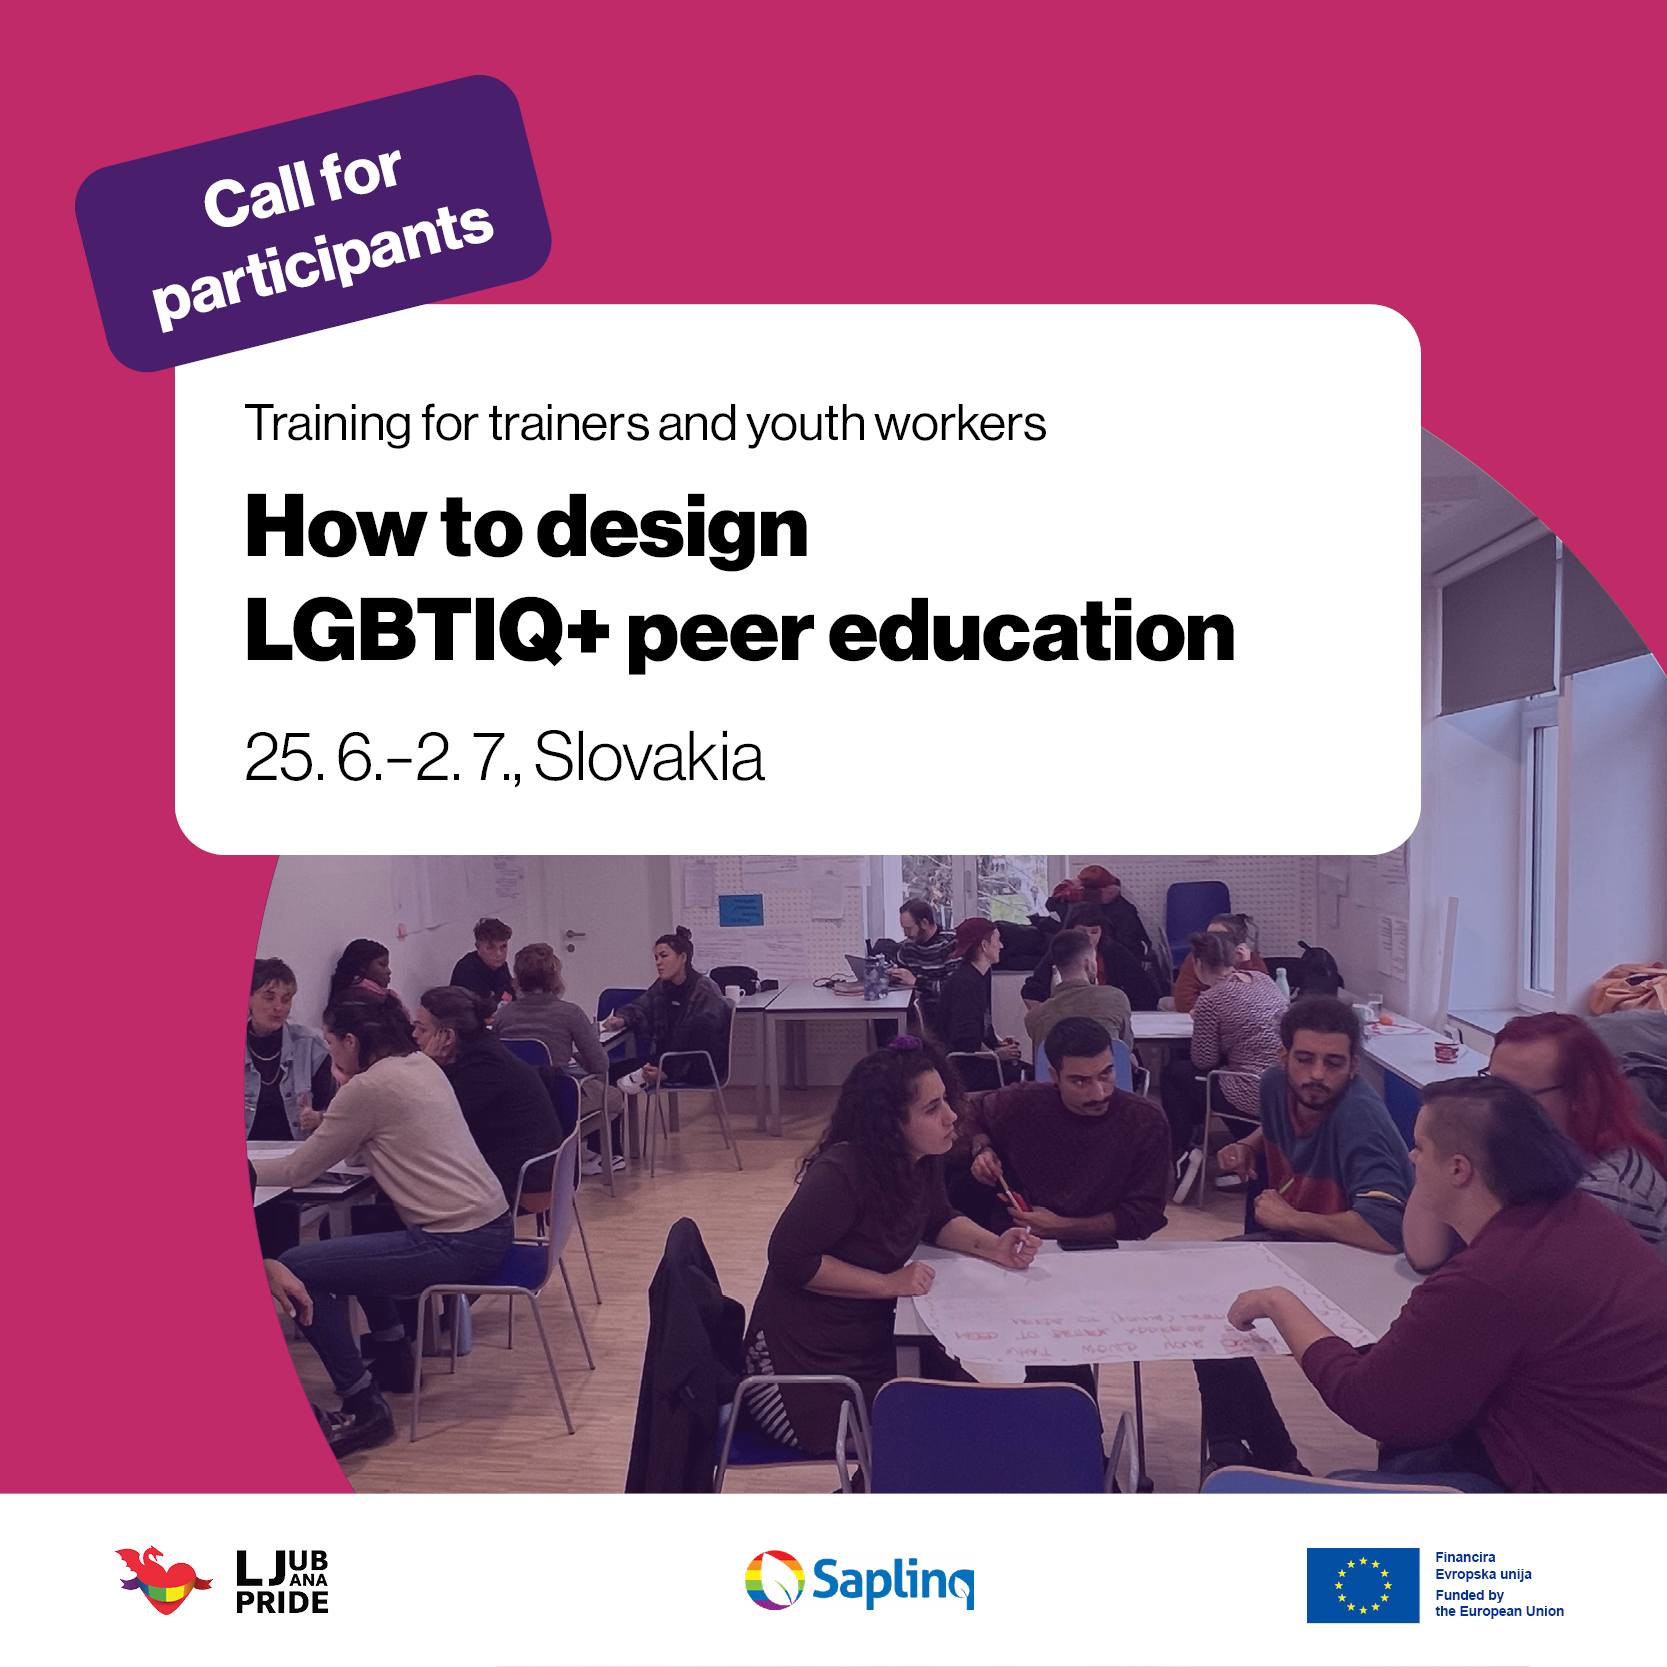 Call for participants: How to design LGBTIQ+ peer education